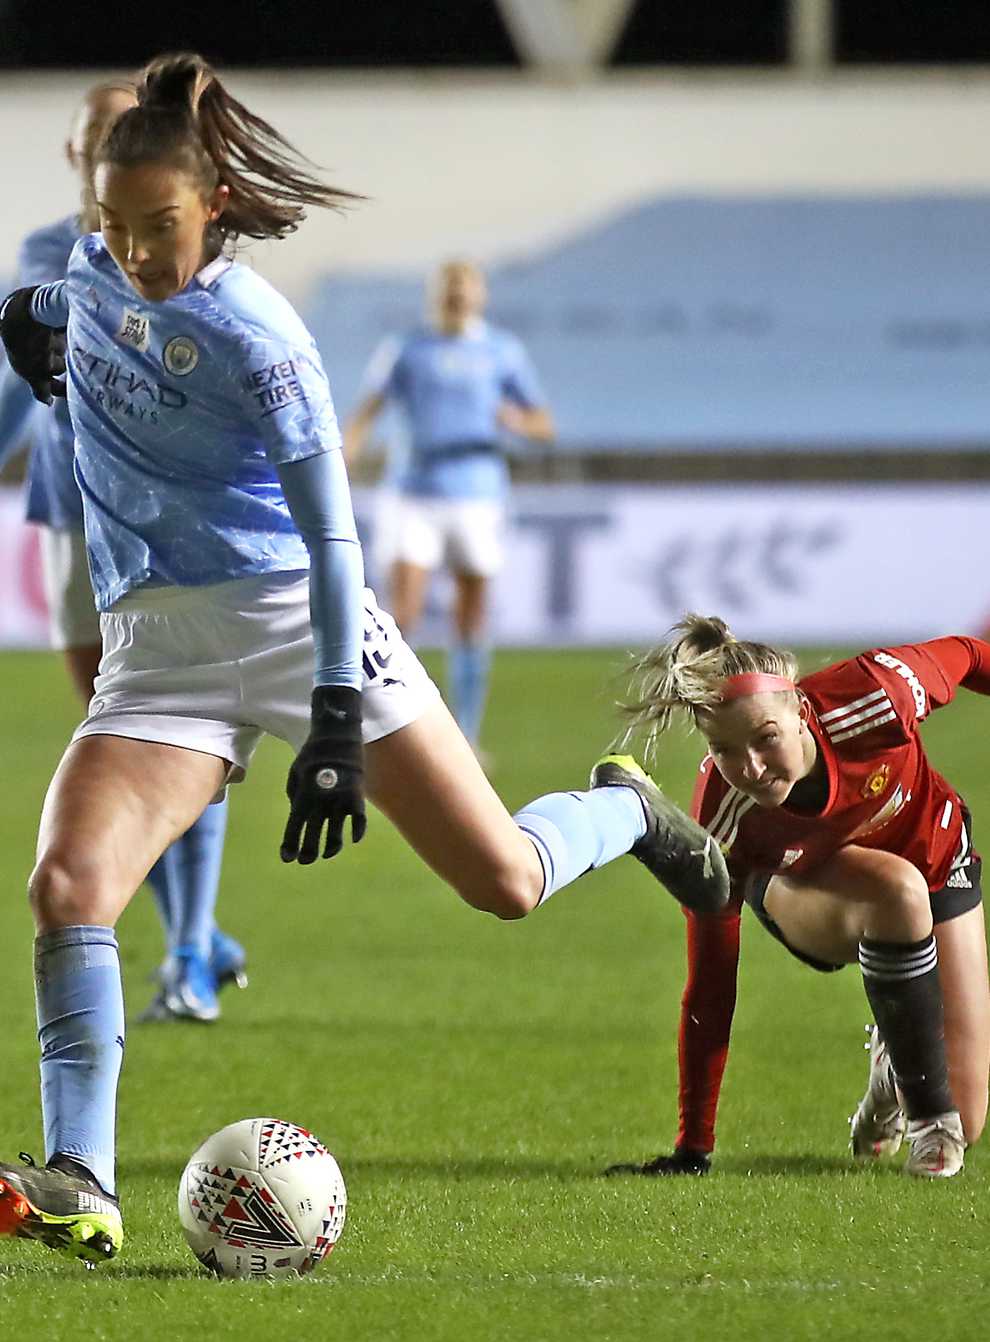 Manchester City’s Caroline Weir is nominated for the 2021 Puskas for her goal against Manchester United in February (Tim Goode/PA)